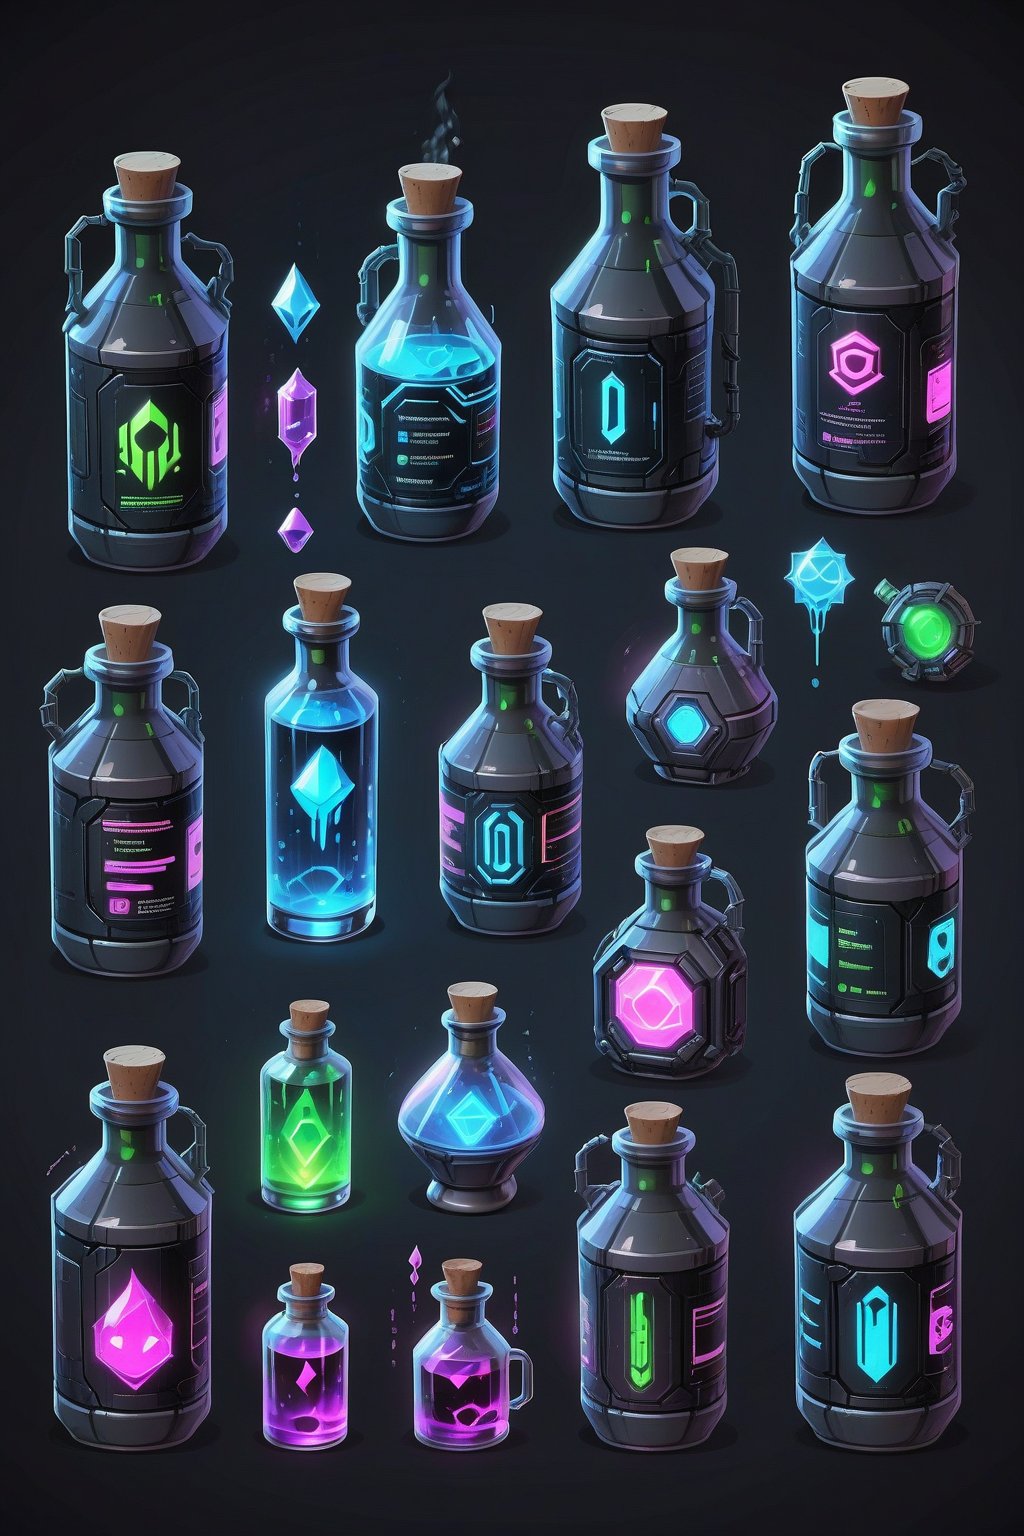 Array of cyberpunk style advanced technology potion bottles, Each item is an independent entity, Arranged in 2D game prop style, No overlapping, Solid gray-black background for easy clipping, High quality, Detailed, 2D style, Game asset, Each potion bottle has unique design, Cyberpunk aesthetics
,Crystal style,Cyberpunk